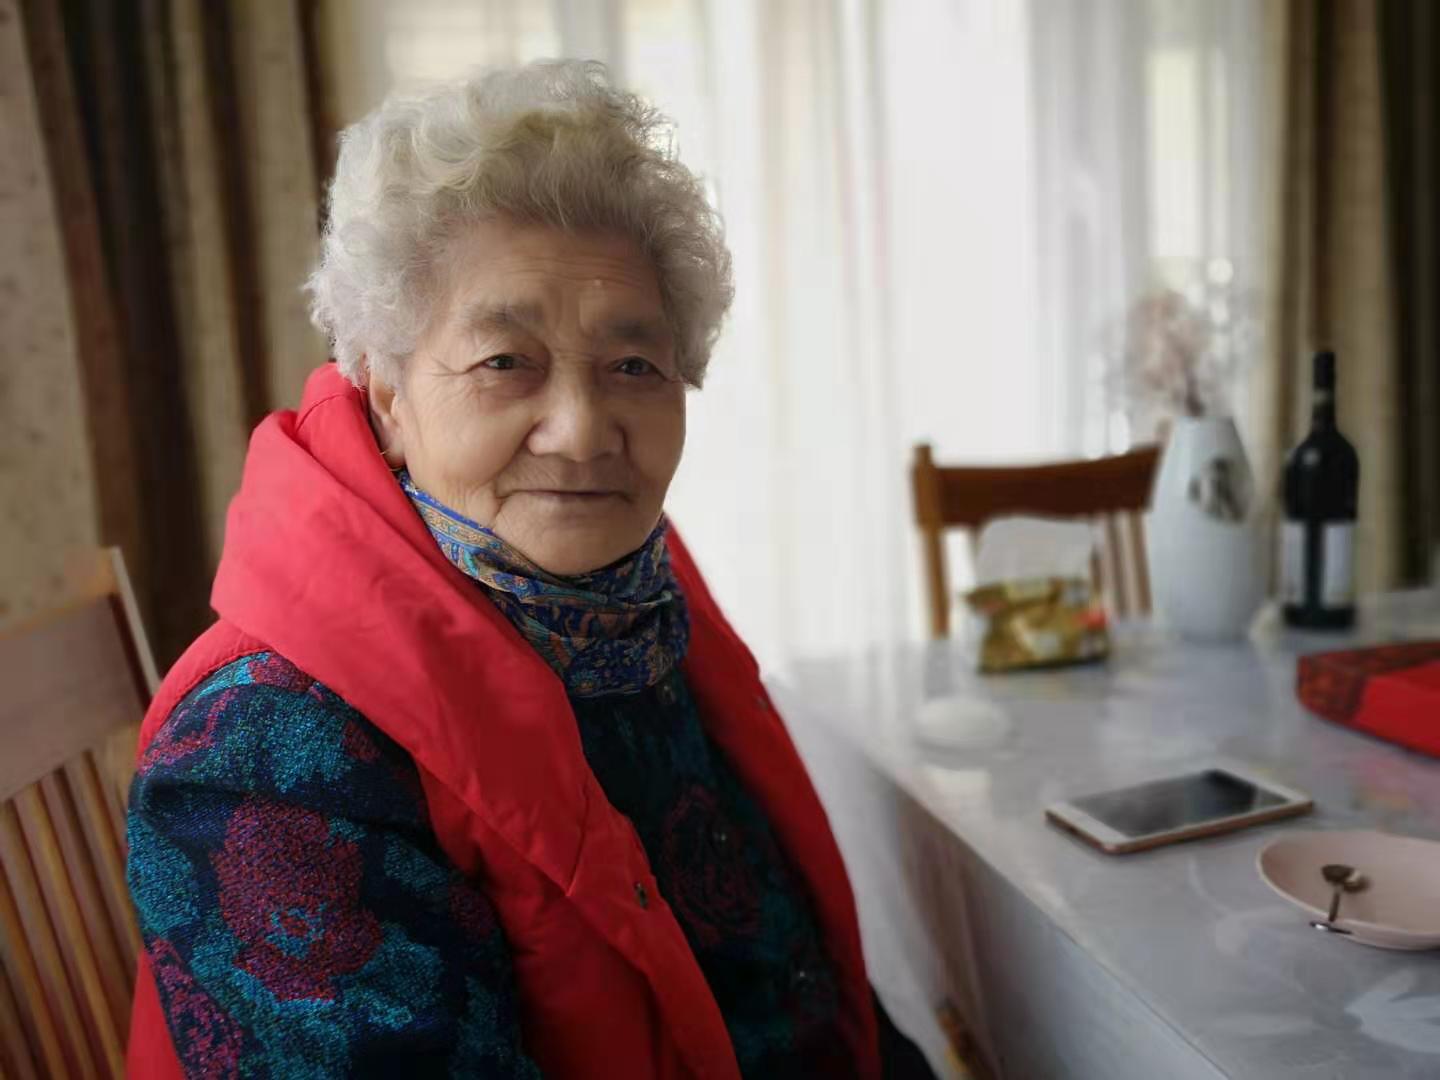 My Host Grandmother at the Dinner Table, Jizhou, China